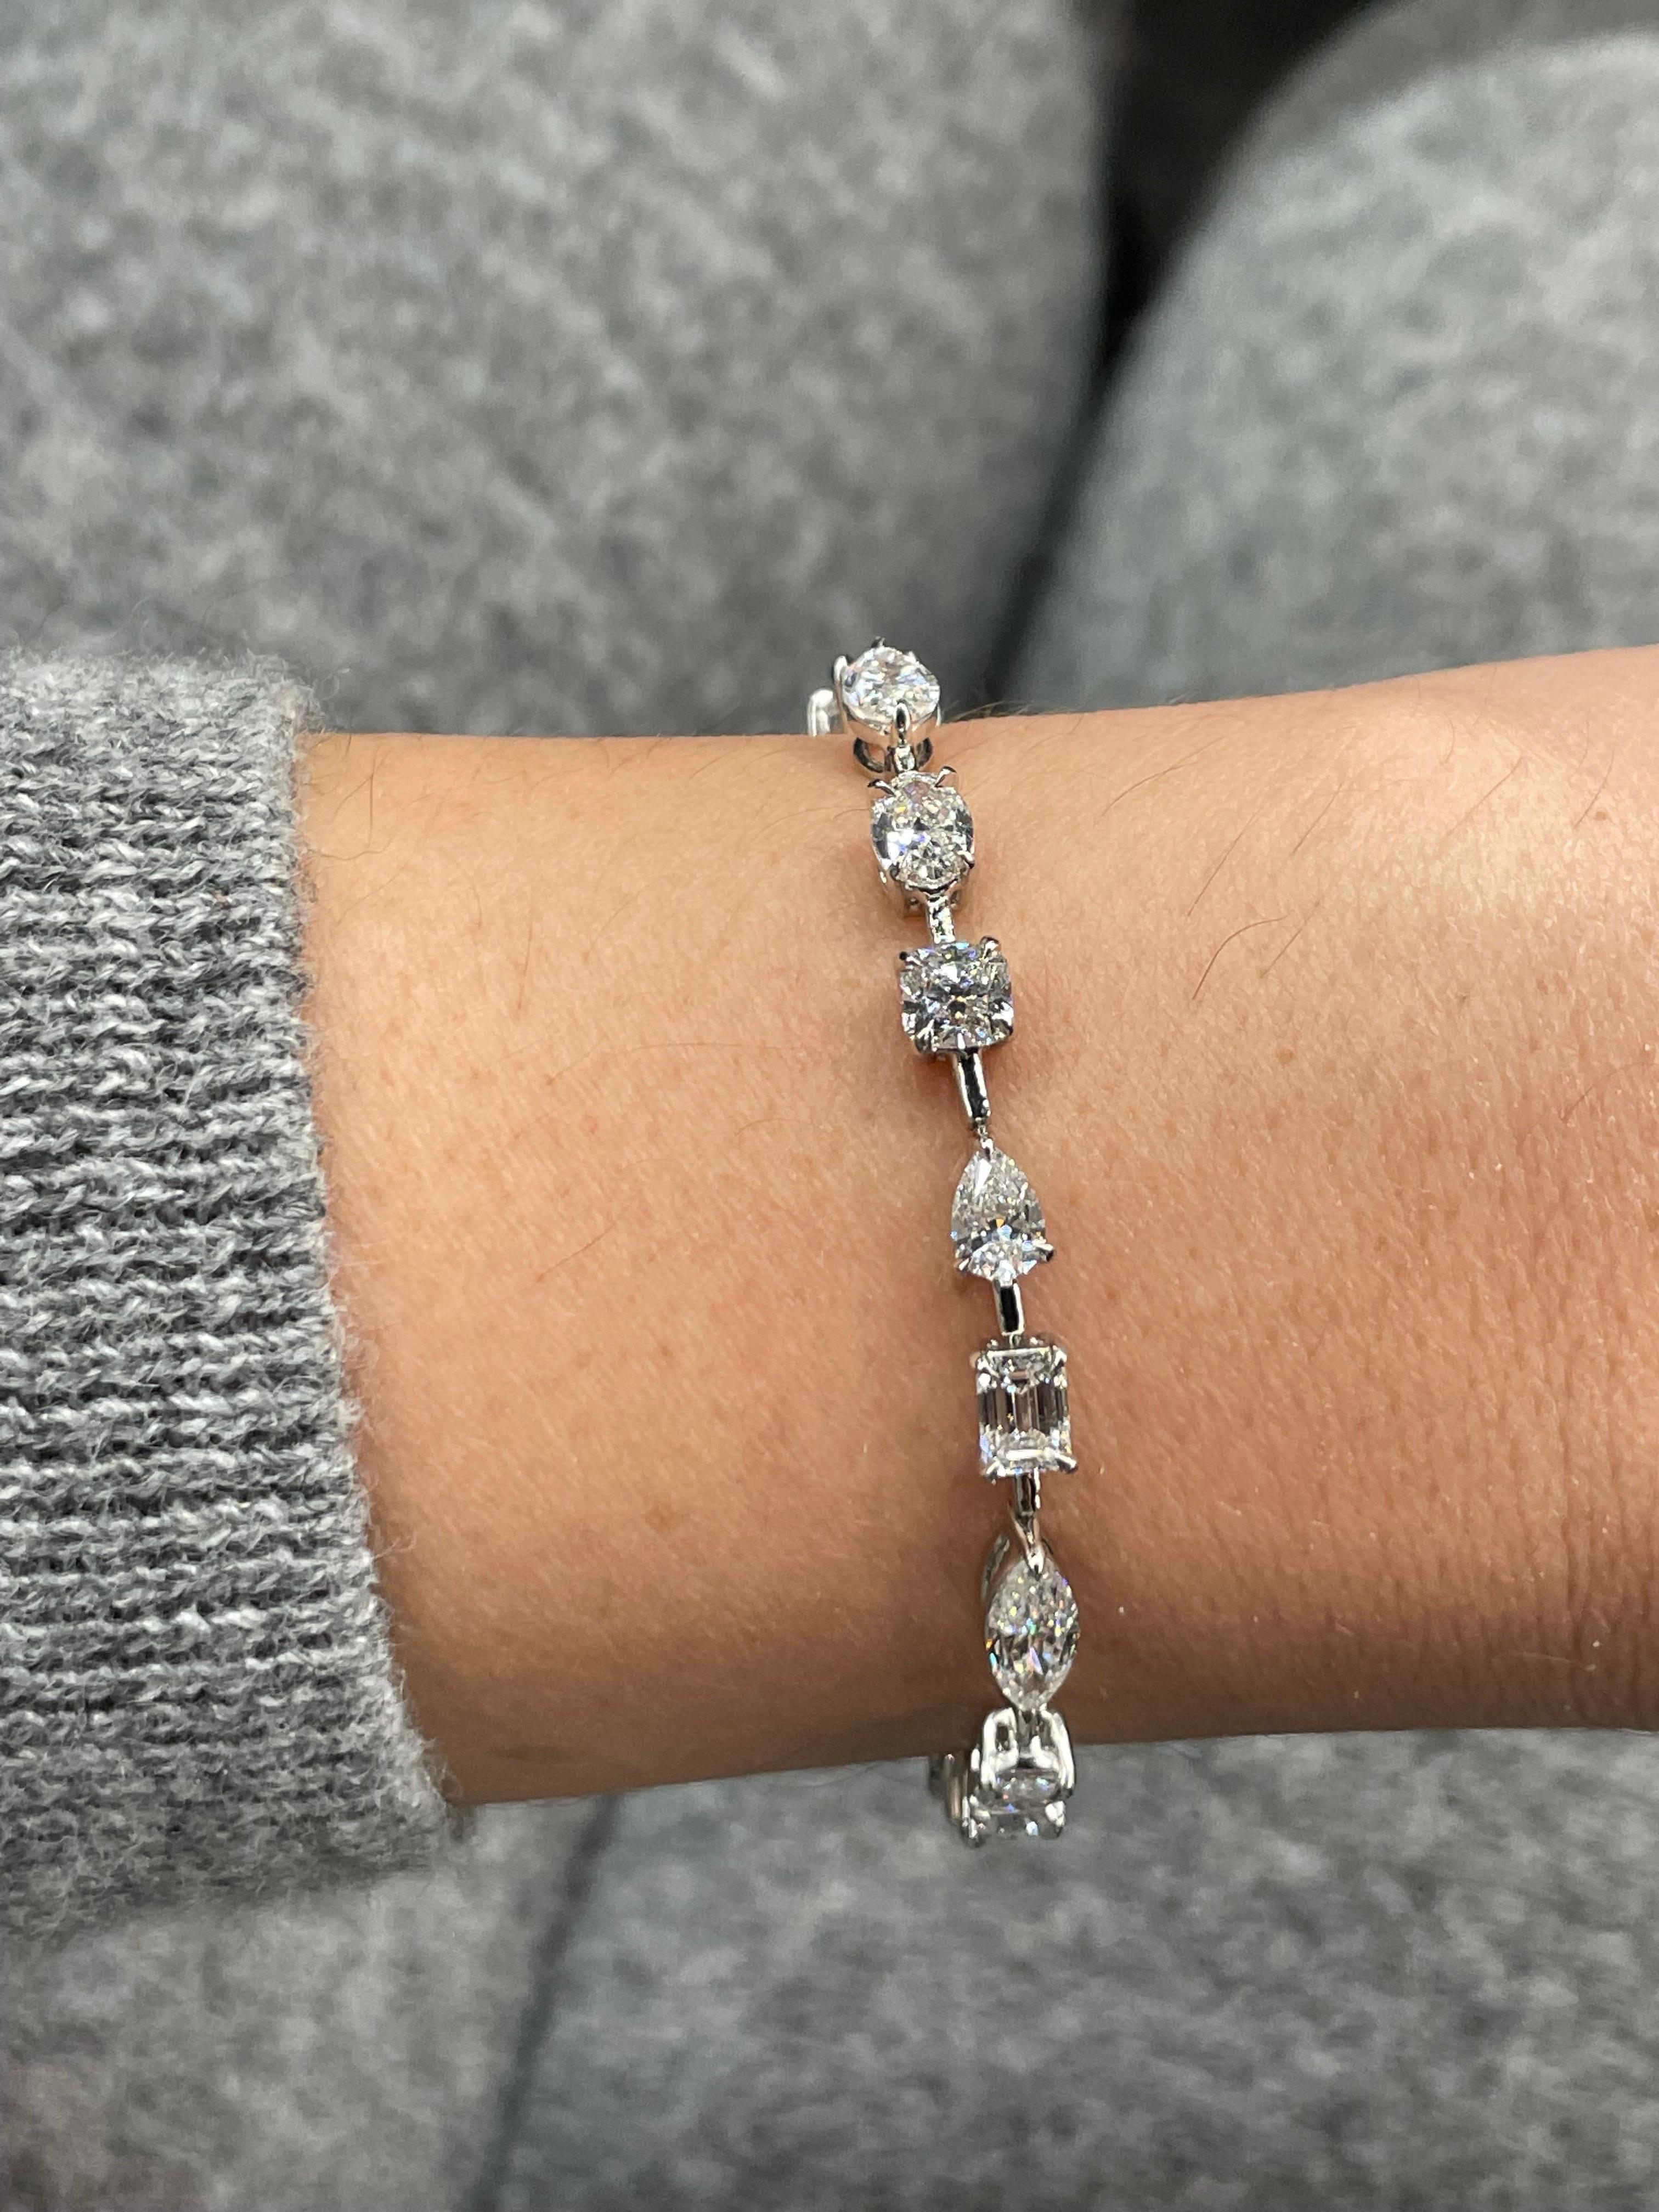 Multi-shape diamond tennis bracelet featuring 19 diamonds weighing 9.63 carats crafted in Platinum.
Order:
Half Moon, Pear, Cushion, Marquise, Emerald, Pear, Oval, Princess, Pear, Radiant, Marquise, Emerald, Pear, Cushion, Oval, Marquise, Pear,